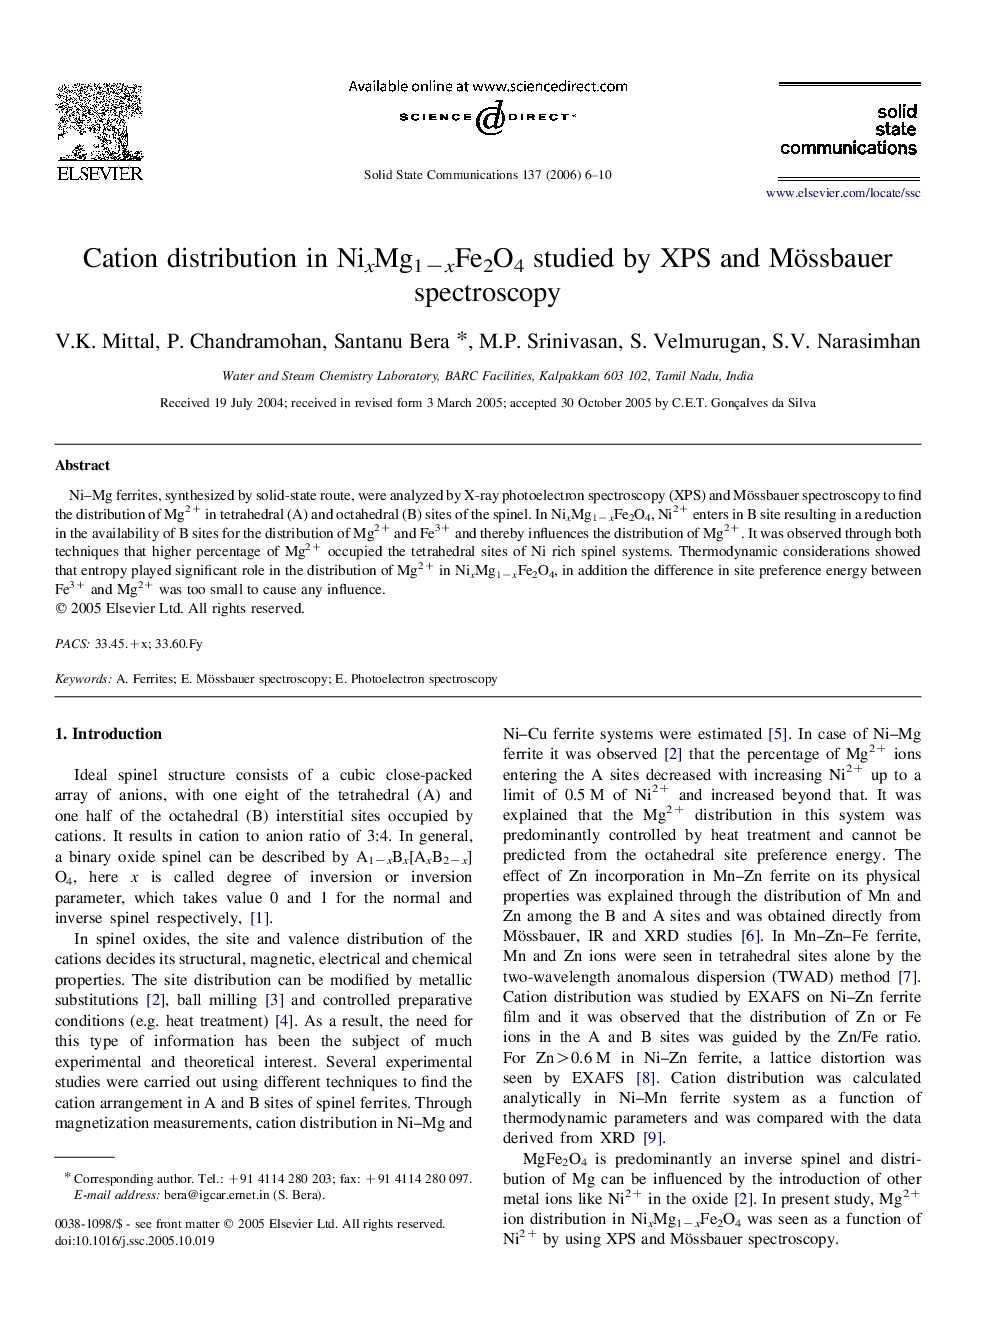 Cation distribution in NixMg1−xFe2O4 studied by XPS and Mössbauer spectroscopy